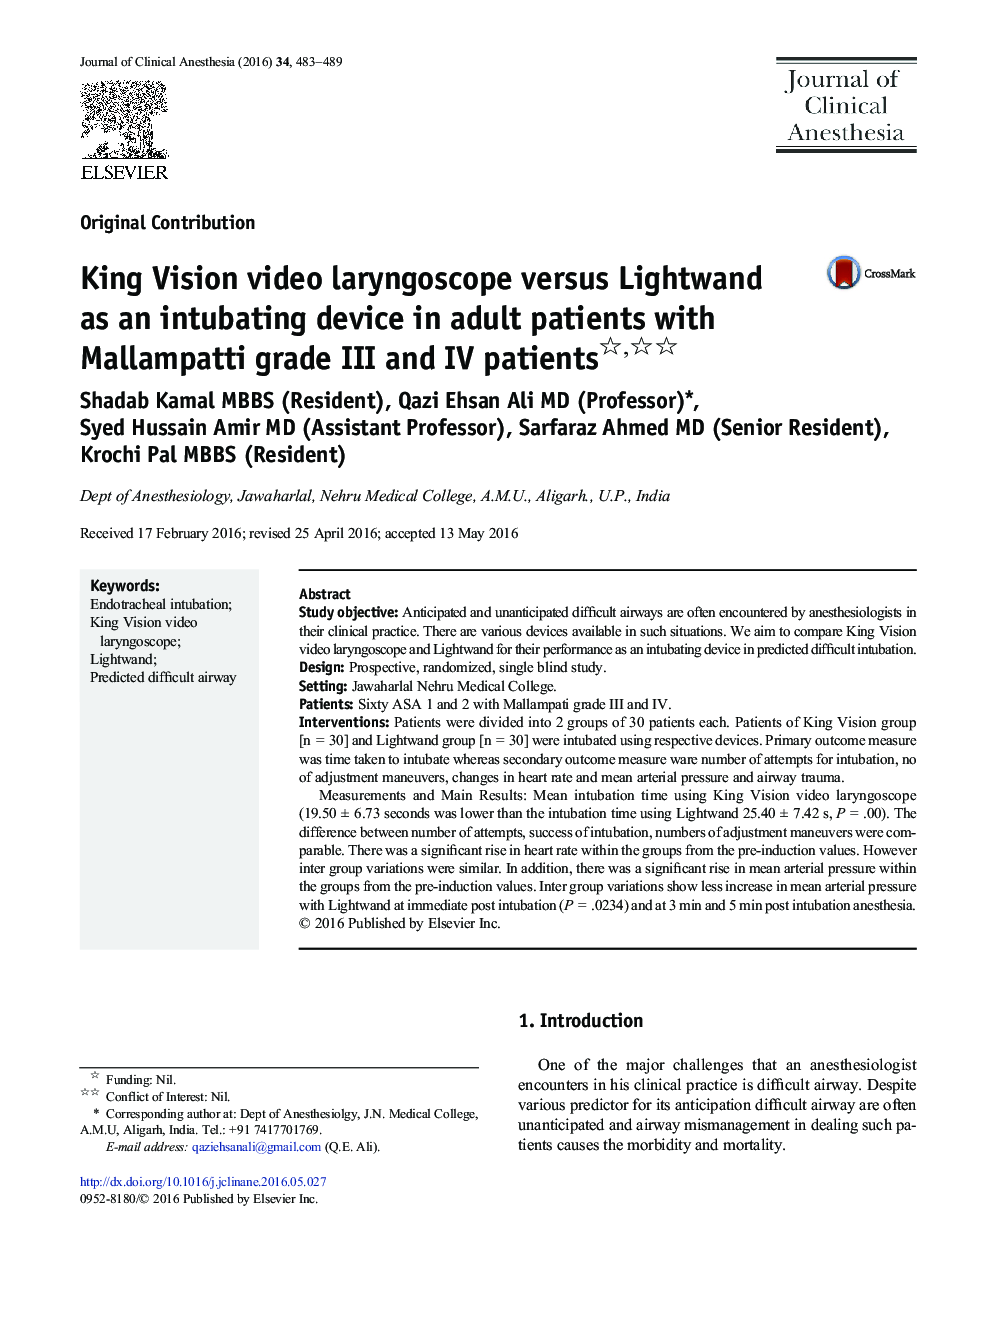 King Vision video laryngoscope versus Lightwand as an intubating device in adult patients with Mallampatti grade III and IV patients